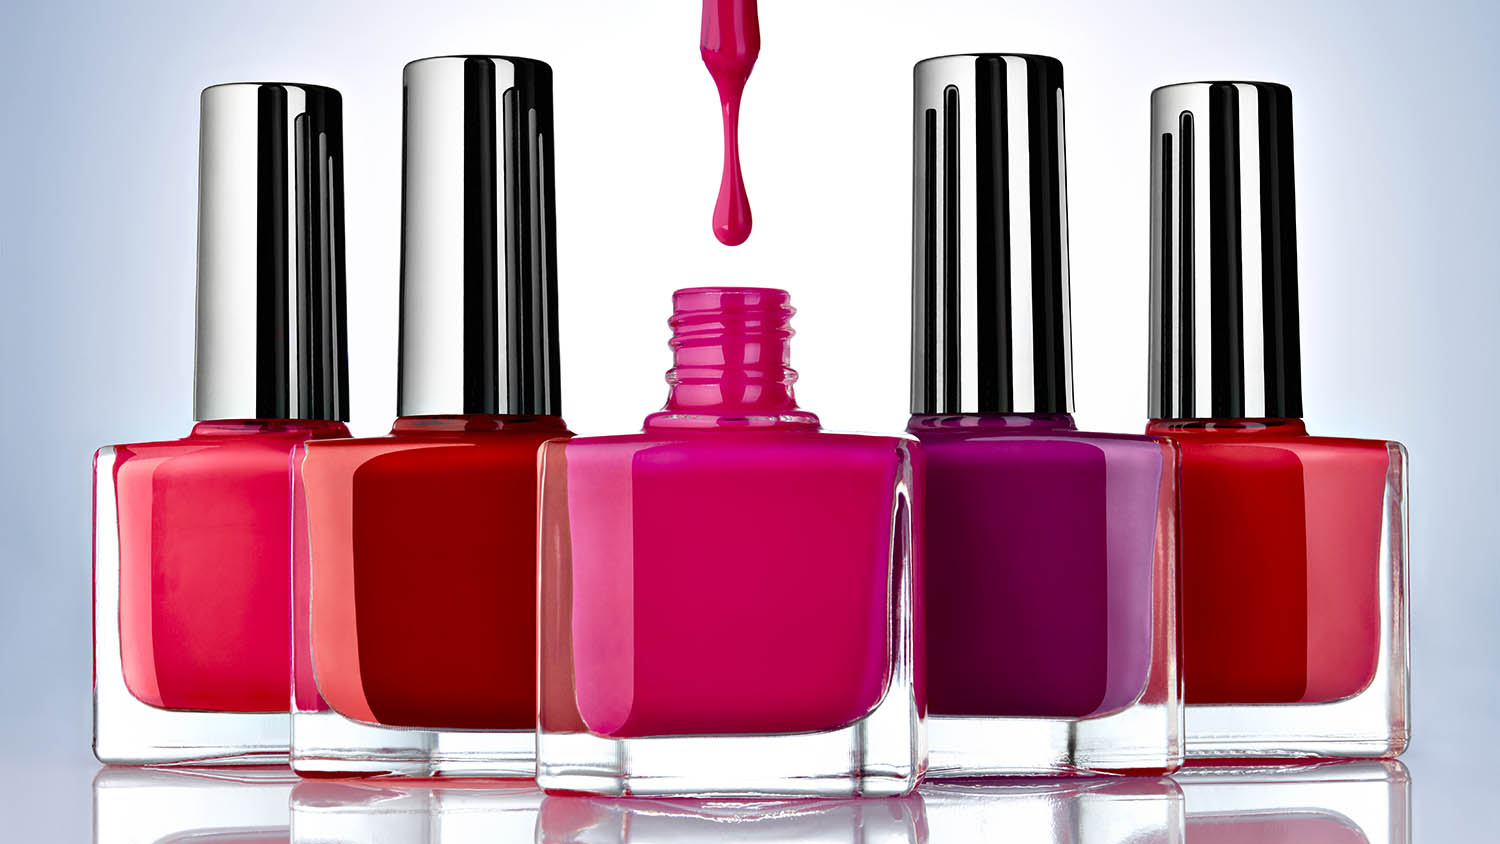 Is Gel Nail Polish Bad For Your Nails?